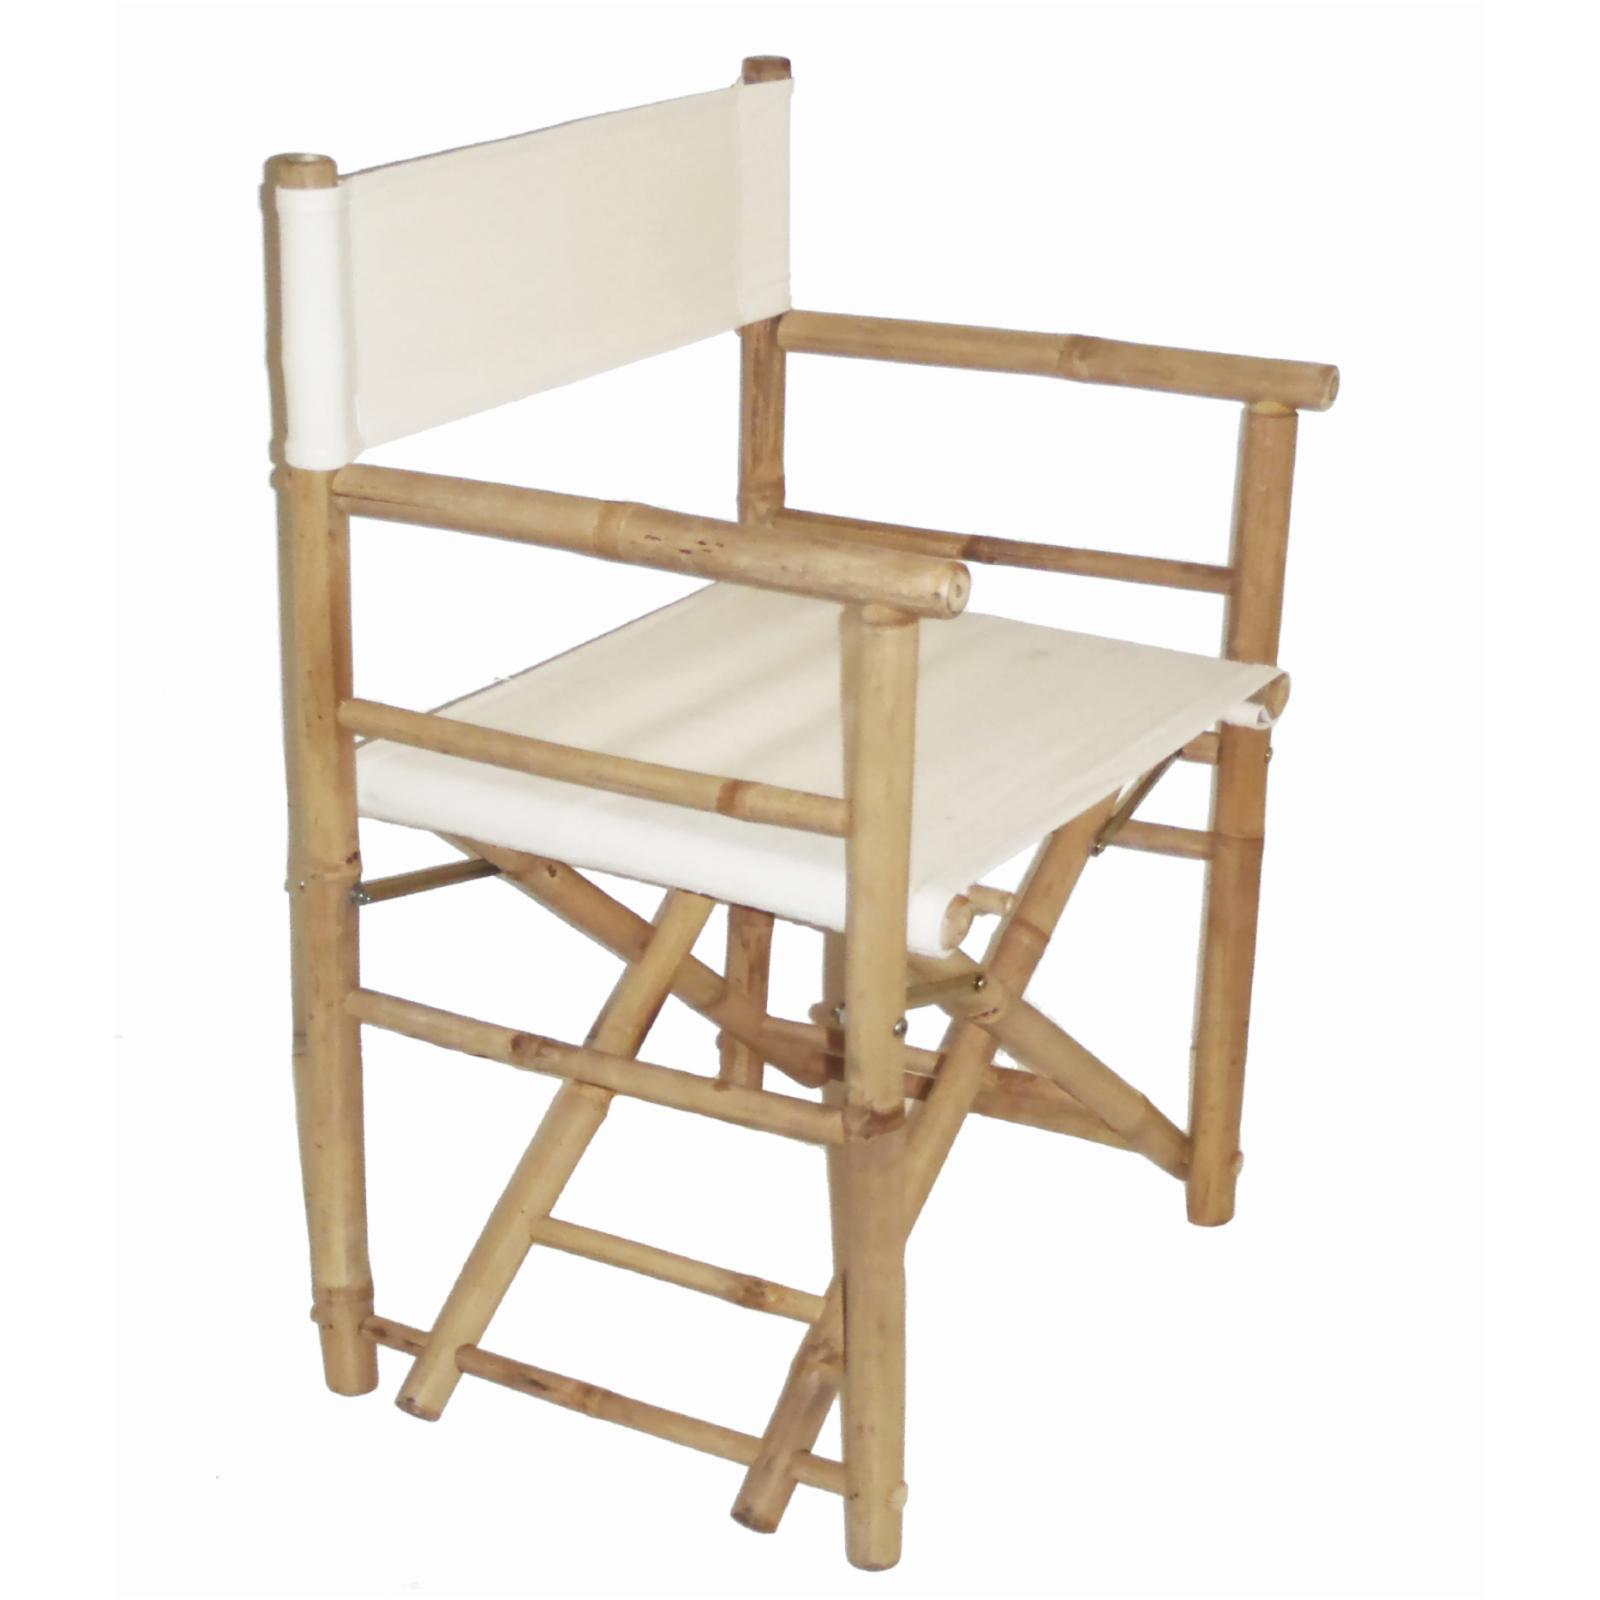 Bamboo54 Folding Bamboo Low Directors Chair with Canvas Cover - Set of 2 - image 3 of 5